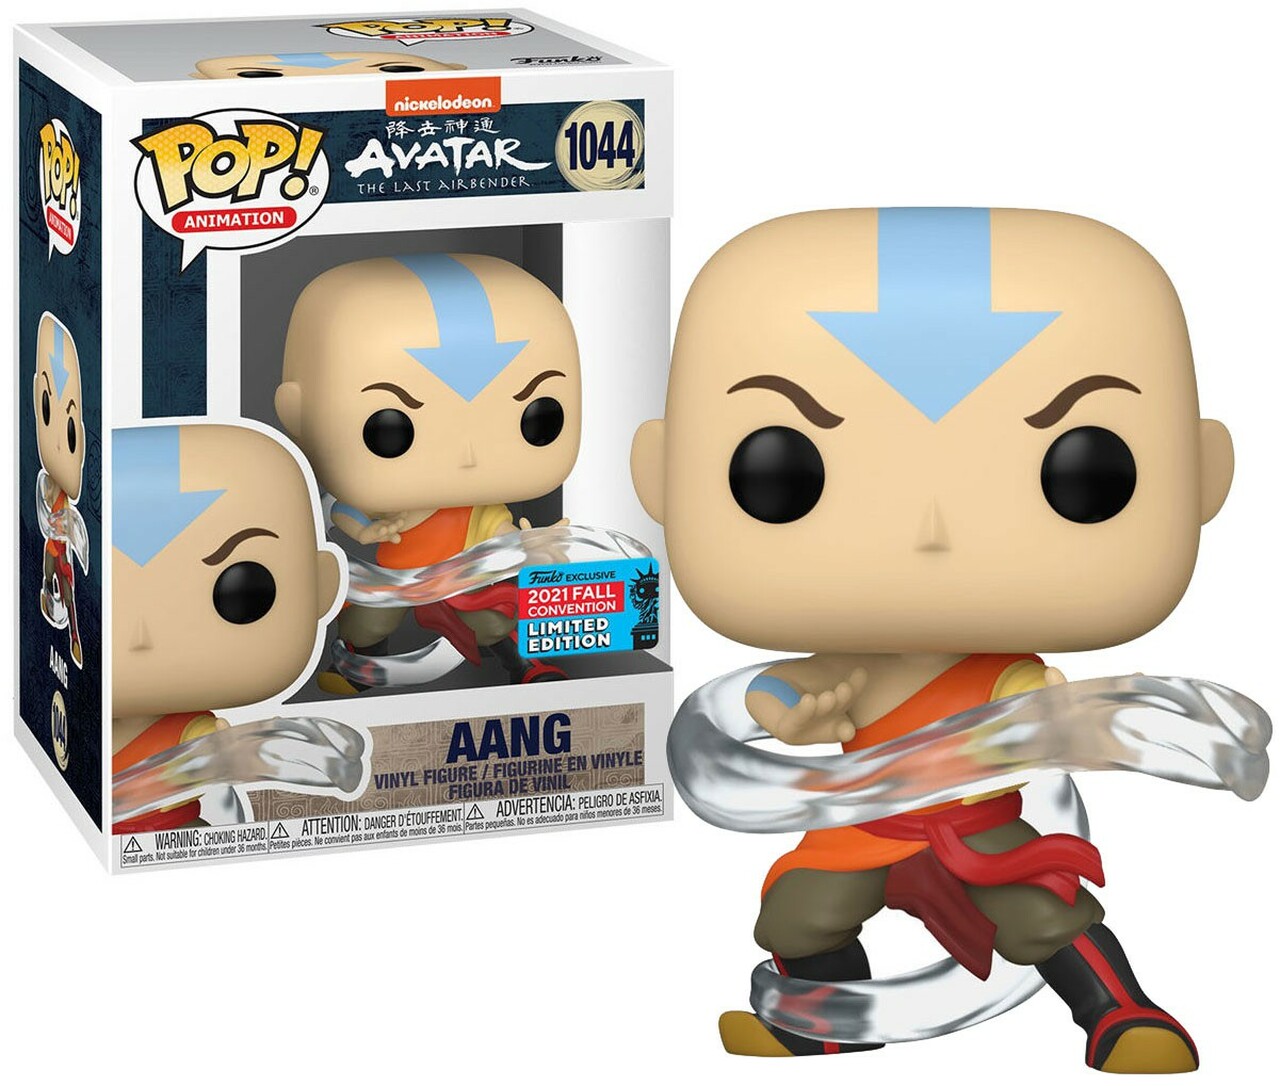 Funko Pop! Aang: Avatar The Last Airbender 2021 Fall Outono Limited Edition #1044 - Funko